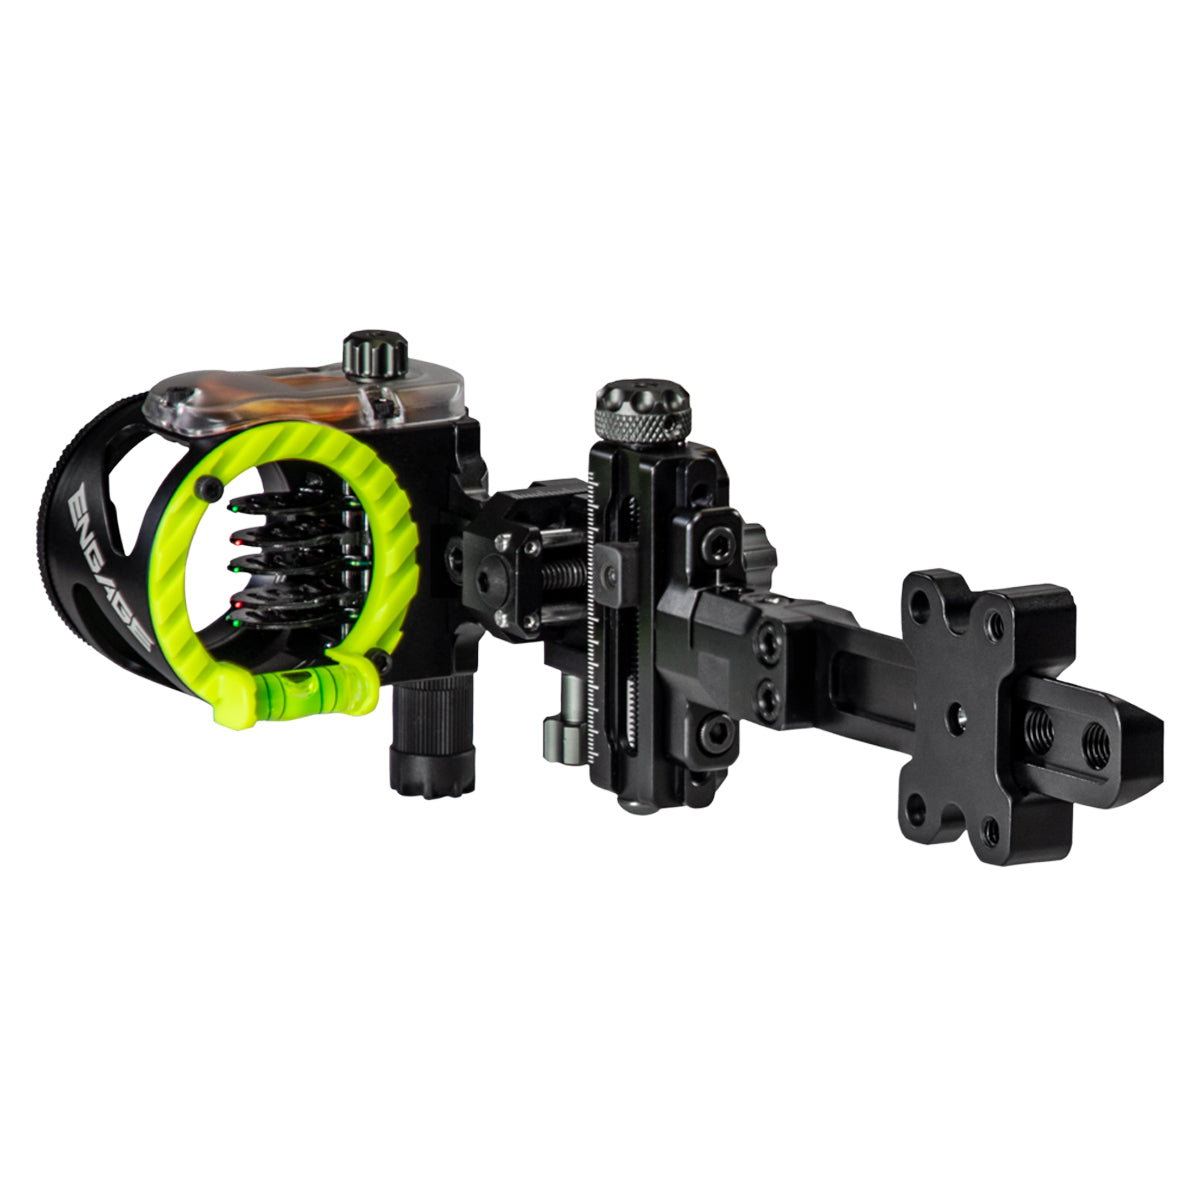 CBE Engage Micro 5 Pin Bow Sight in CBE Engage Micro 5 Pin Bow Sight by CBE | Archery - goHUNT Shop by GOHUNT | CBE - GOHUNT Shop